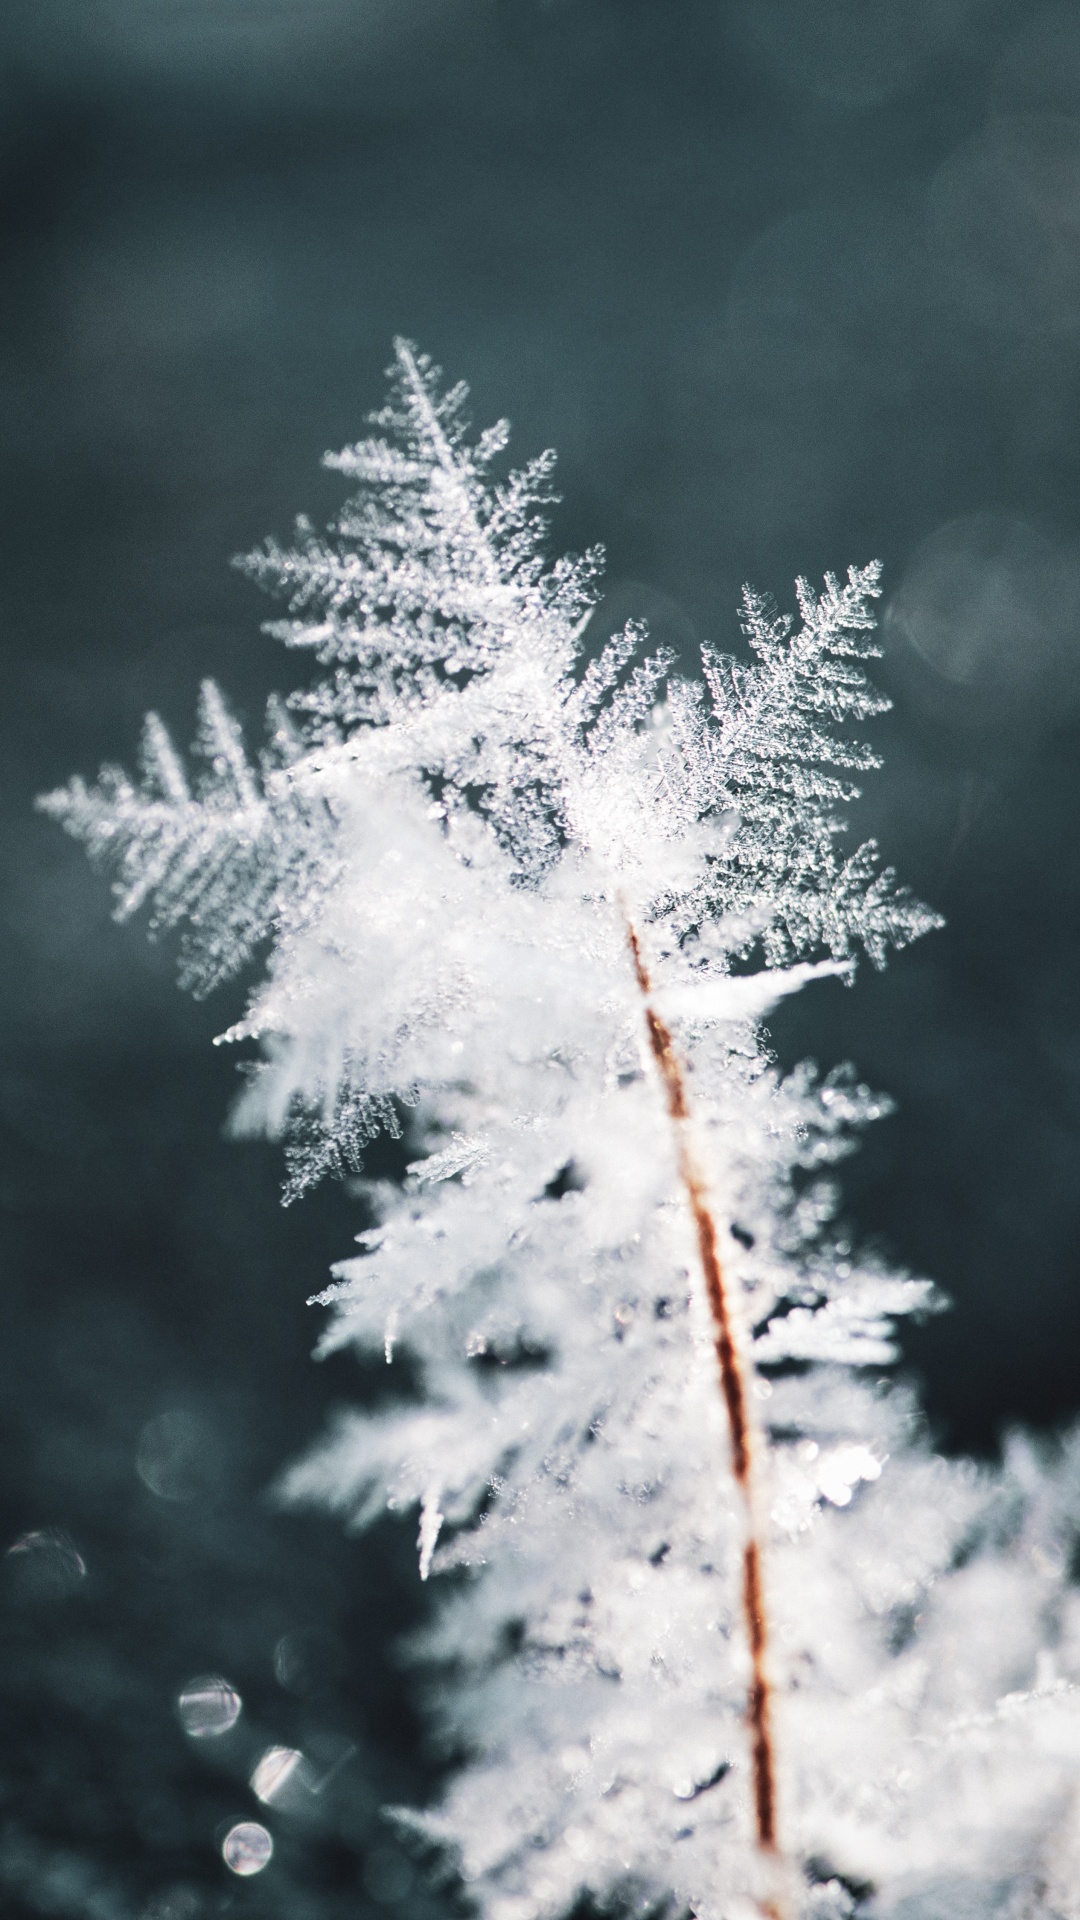 Winter, Snow, Frost, Freezing, Branch. Wallpaper in 1080x1920 Resolution